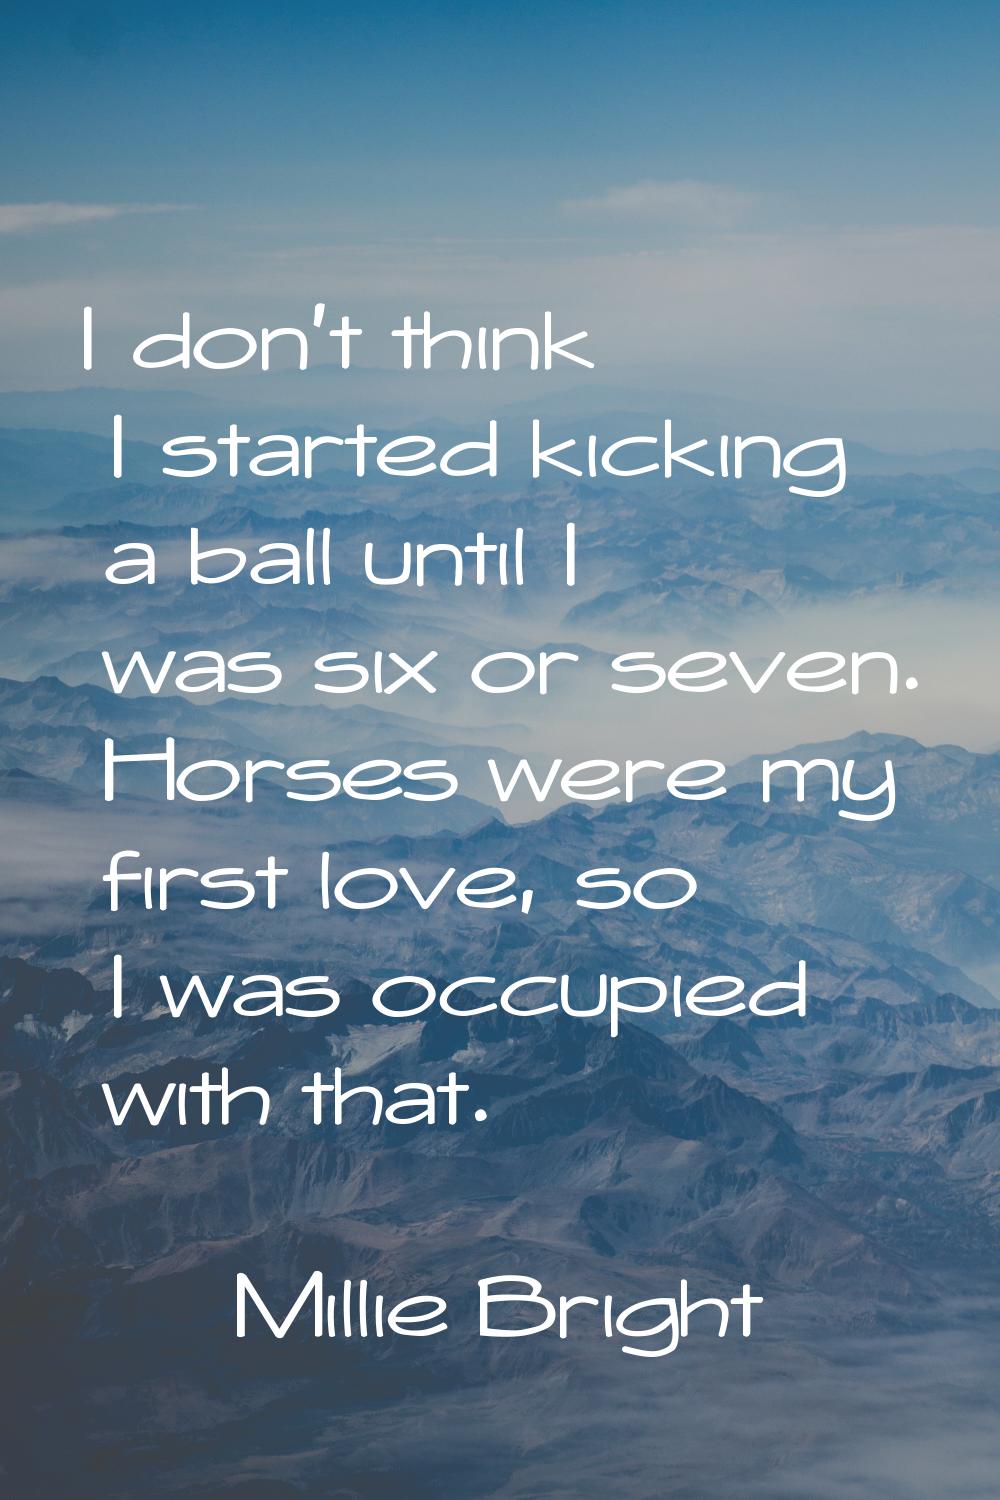 I don't think I started kicking a ball until I was six or seven. Horses were my first love, so I wa